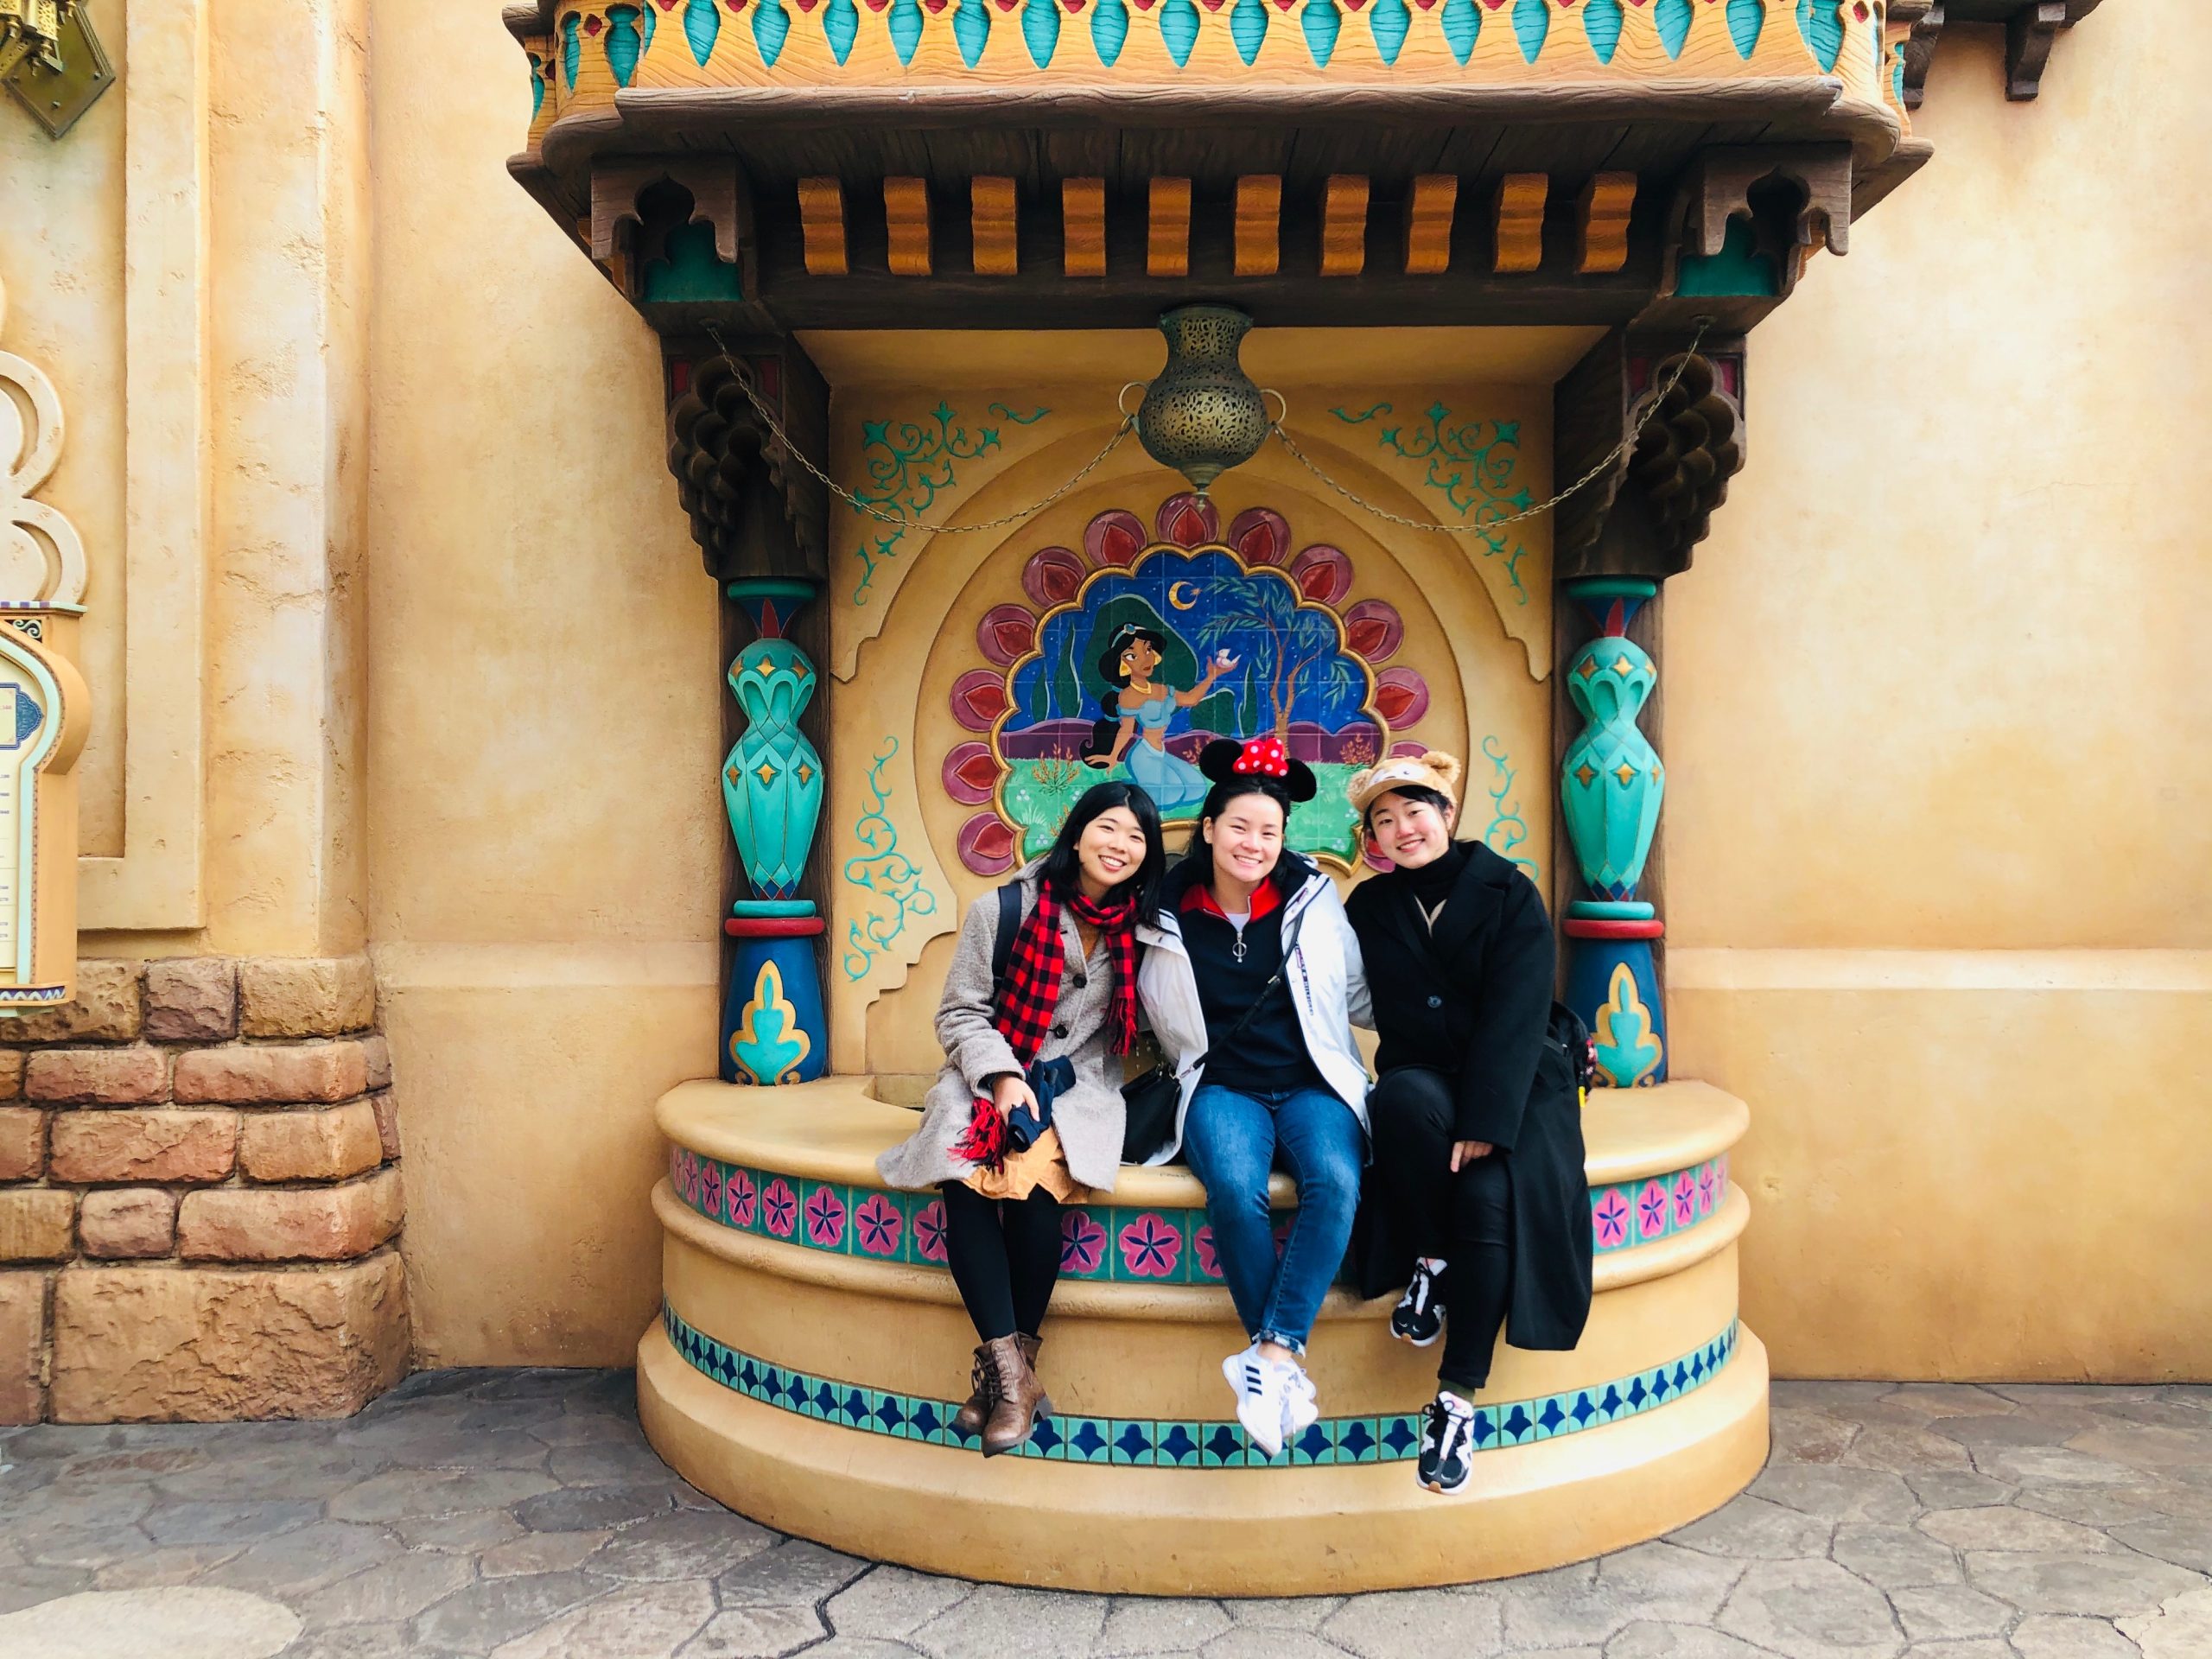 Me, Minami, and Risa posing in front of an Aladdin themed fountain